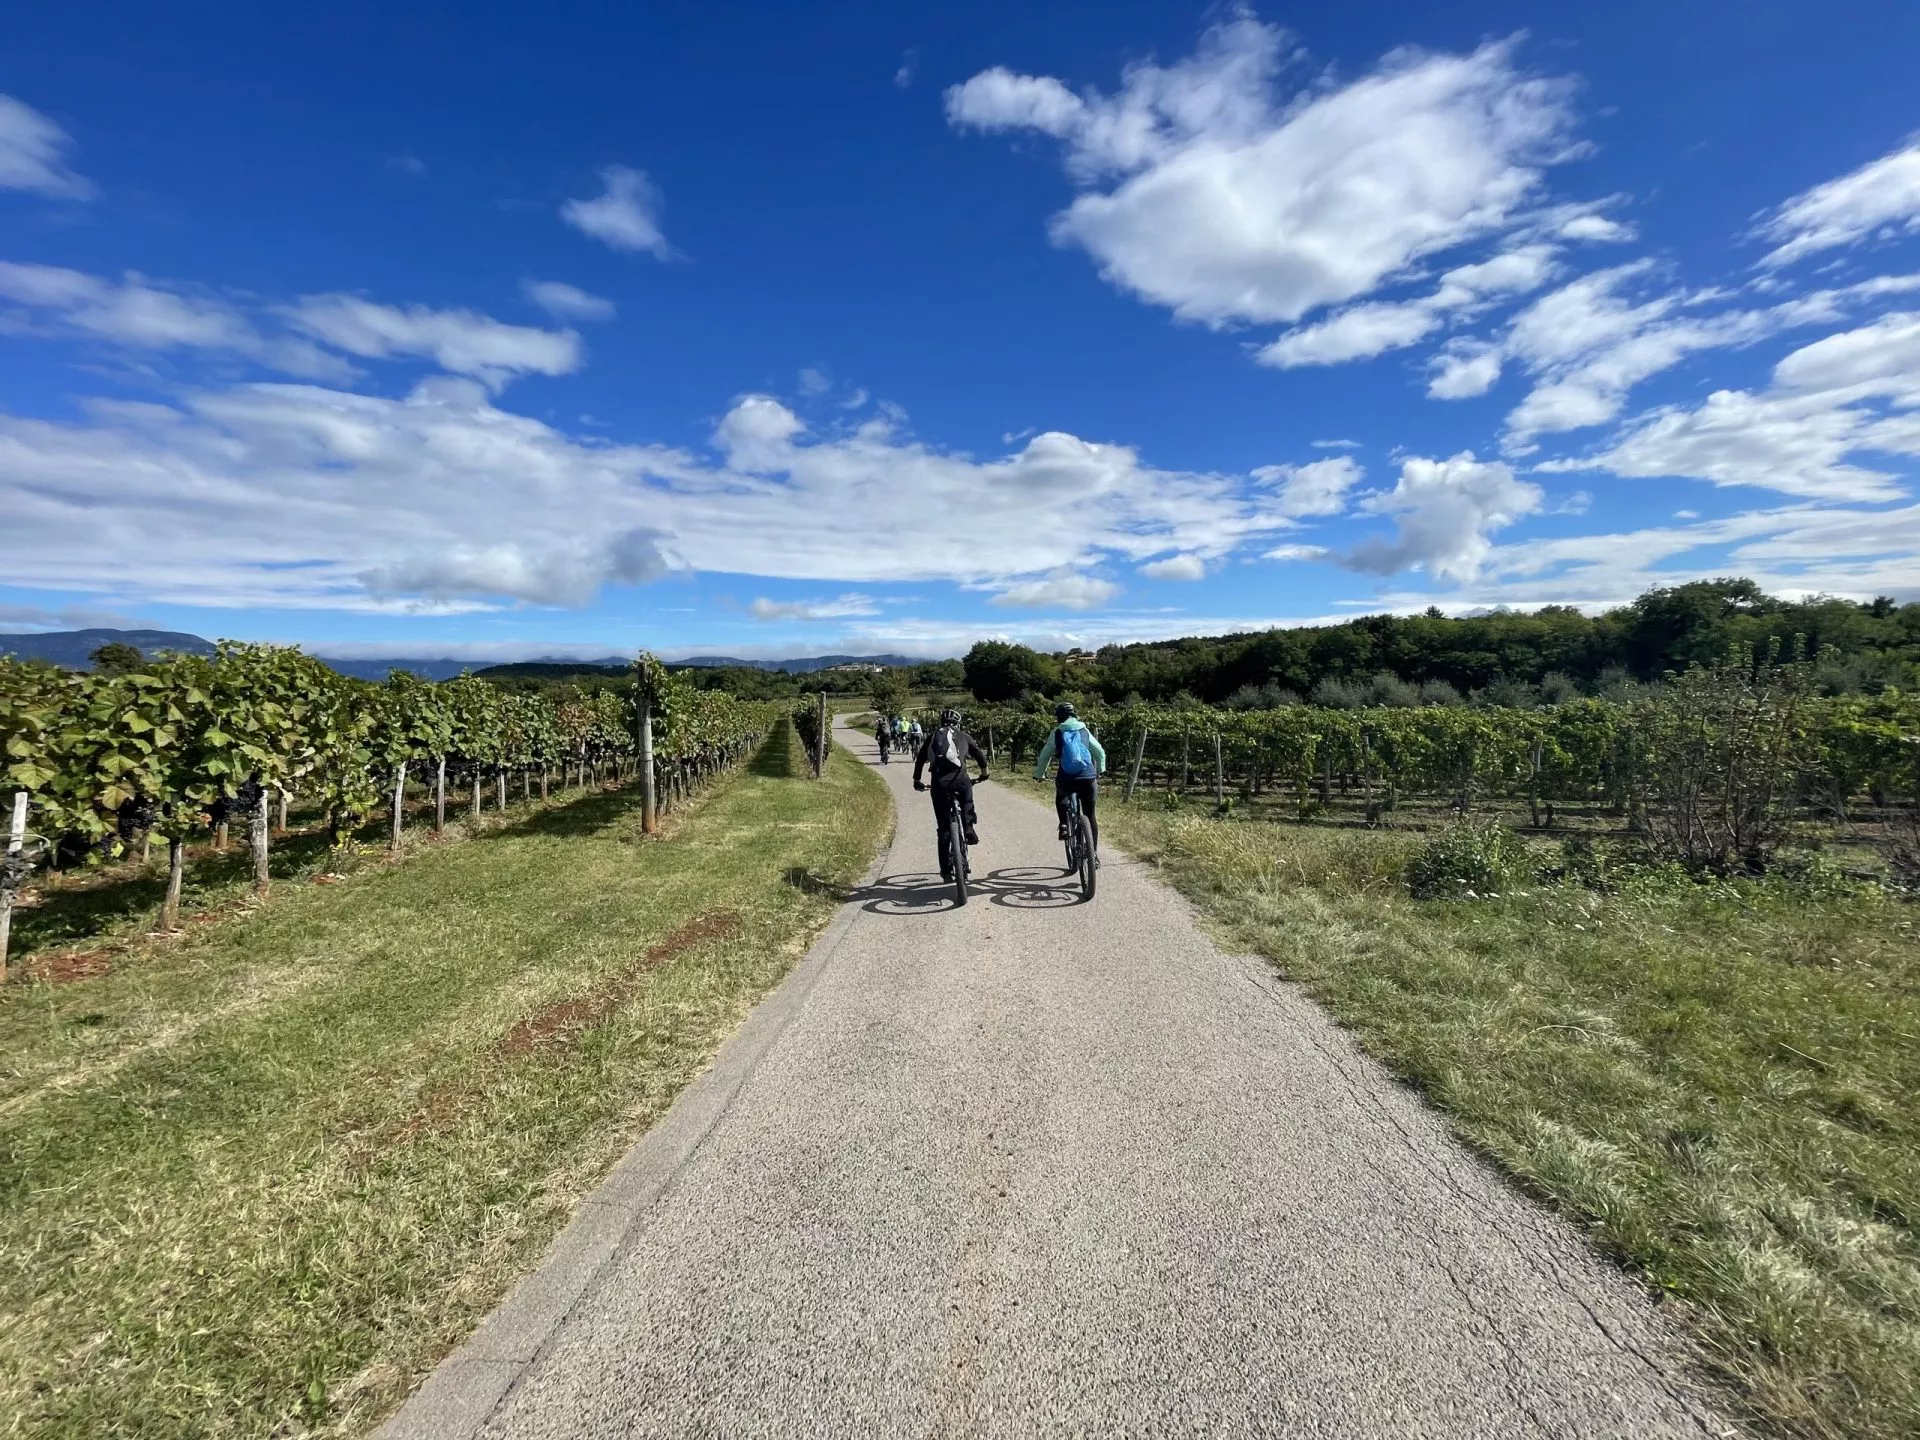 Easy cycling through the vineyards